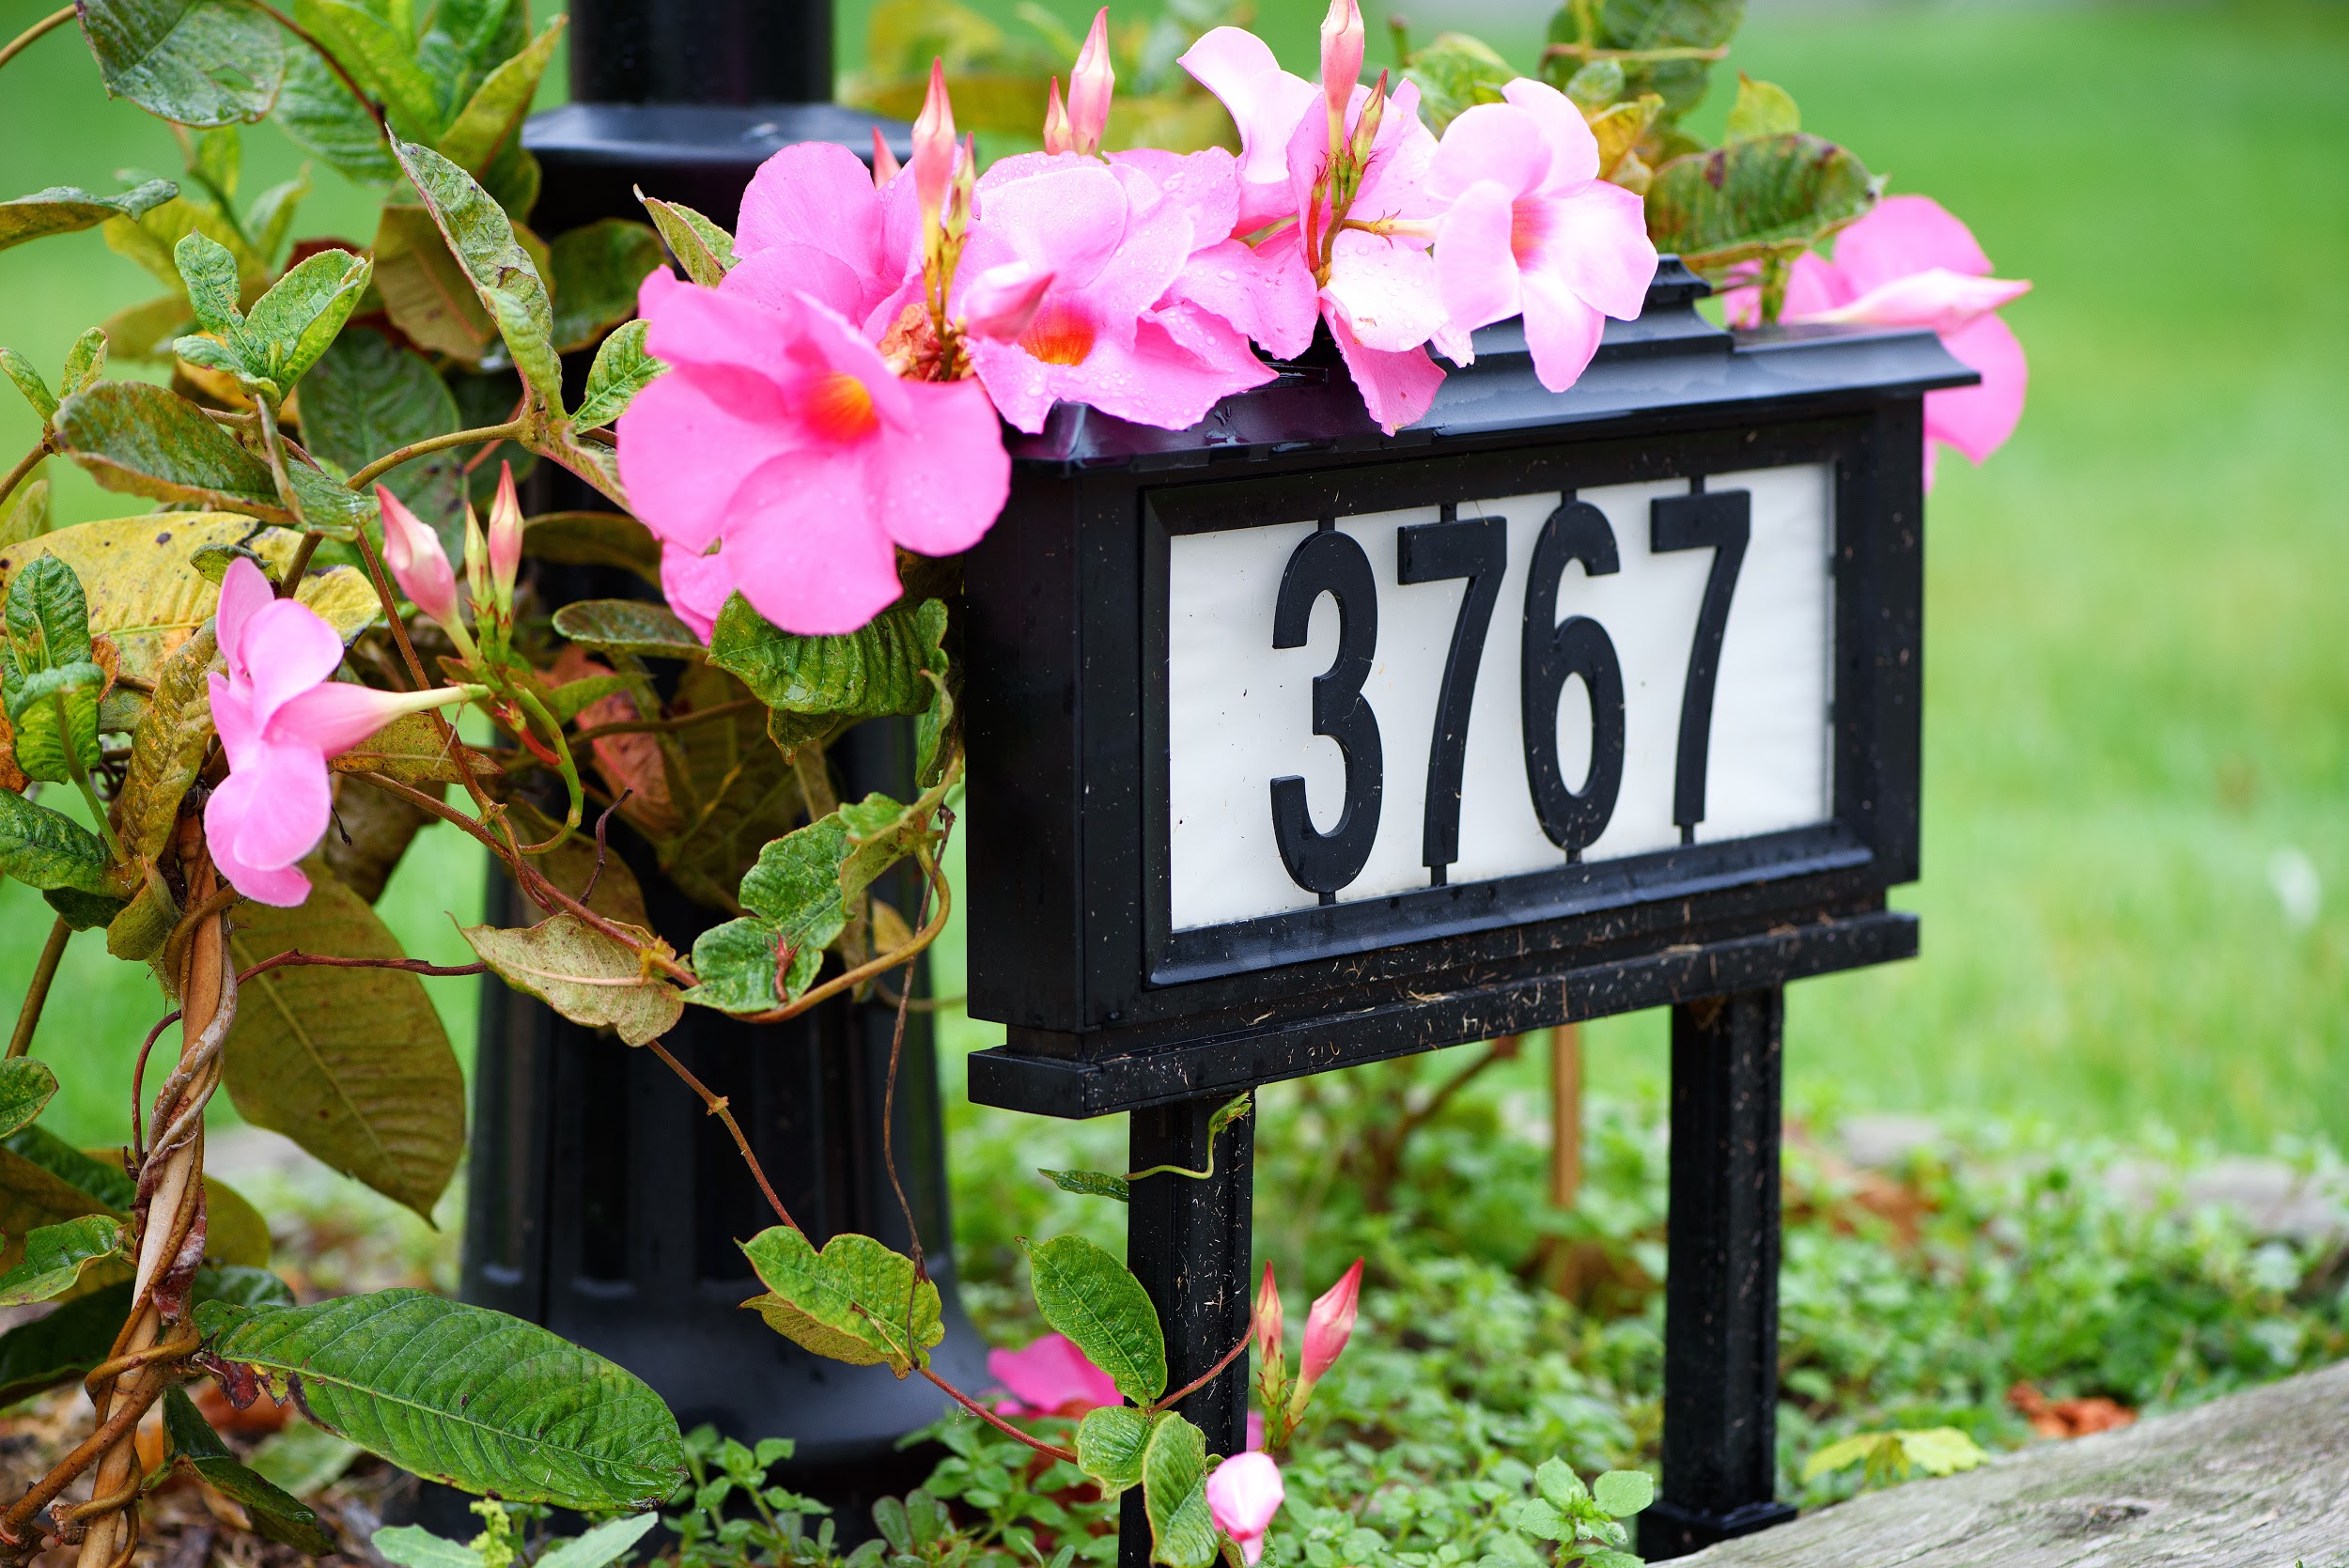 A house number on the front yard with flowers